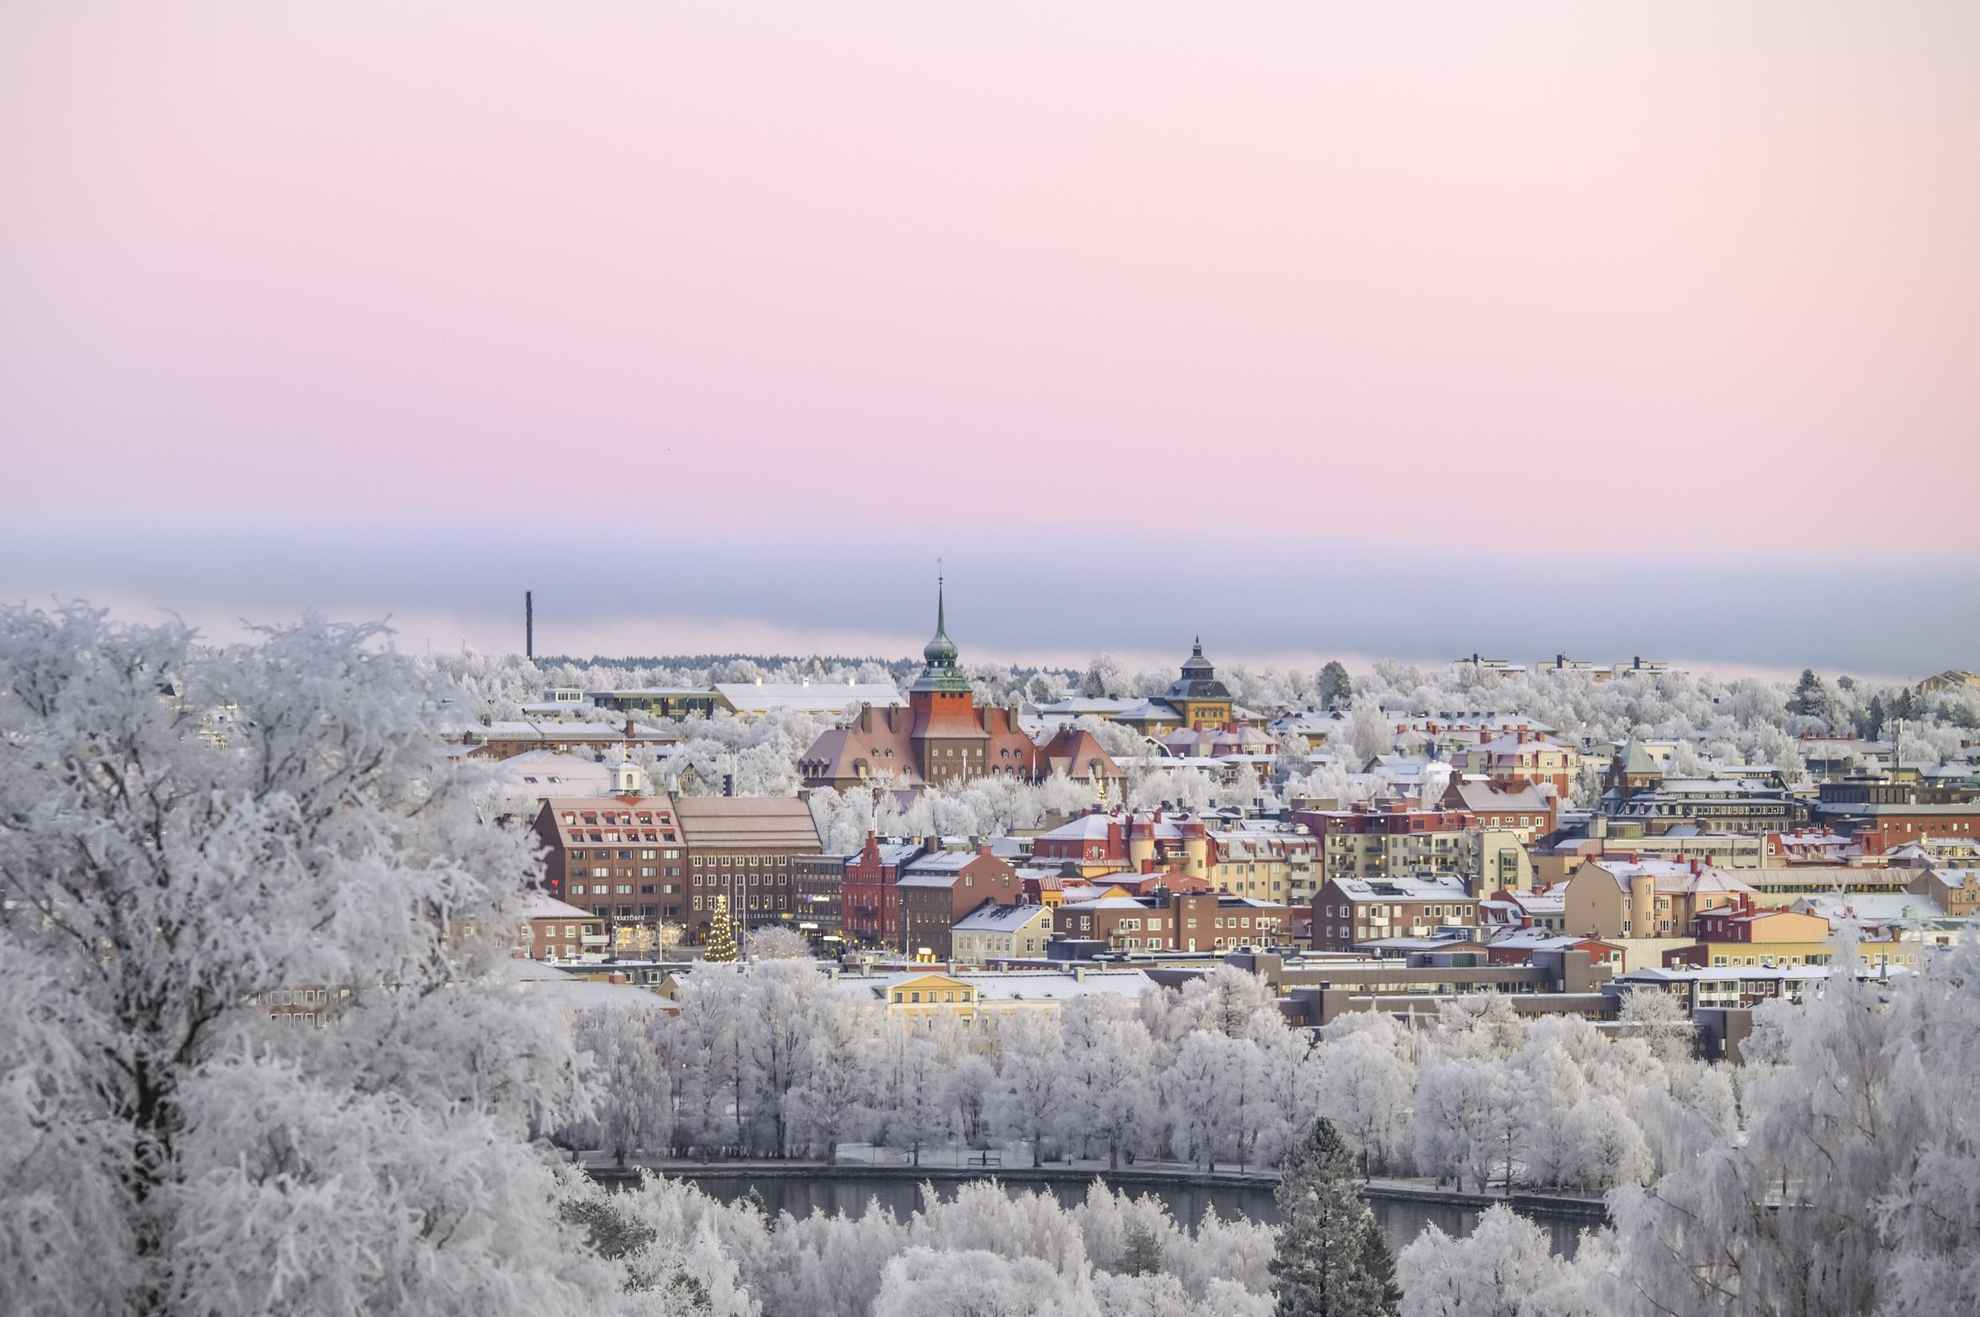 A snow-covered city during winter.